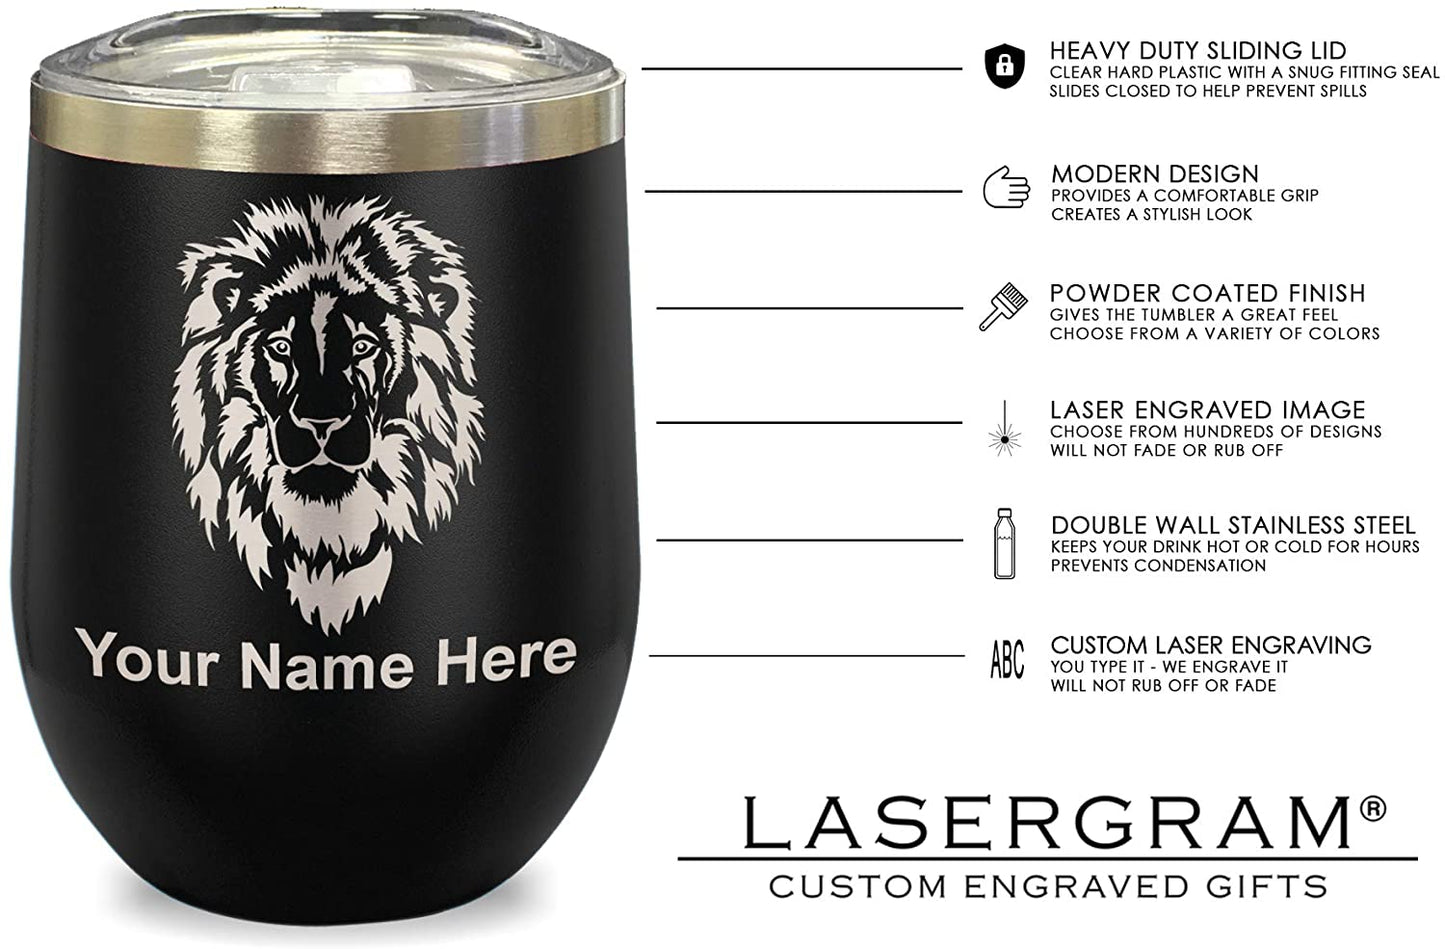 LaserGram Double Wall Stainless Steel Wine Glass, Billiard Balls, Personalized Engraving Included